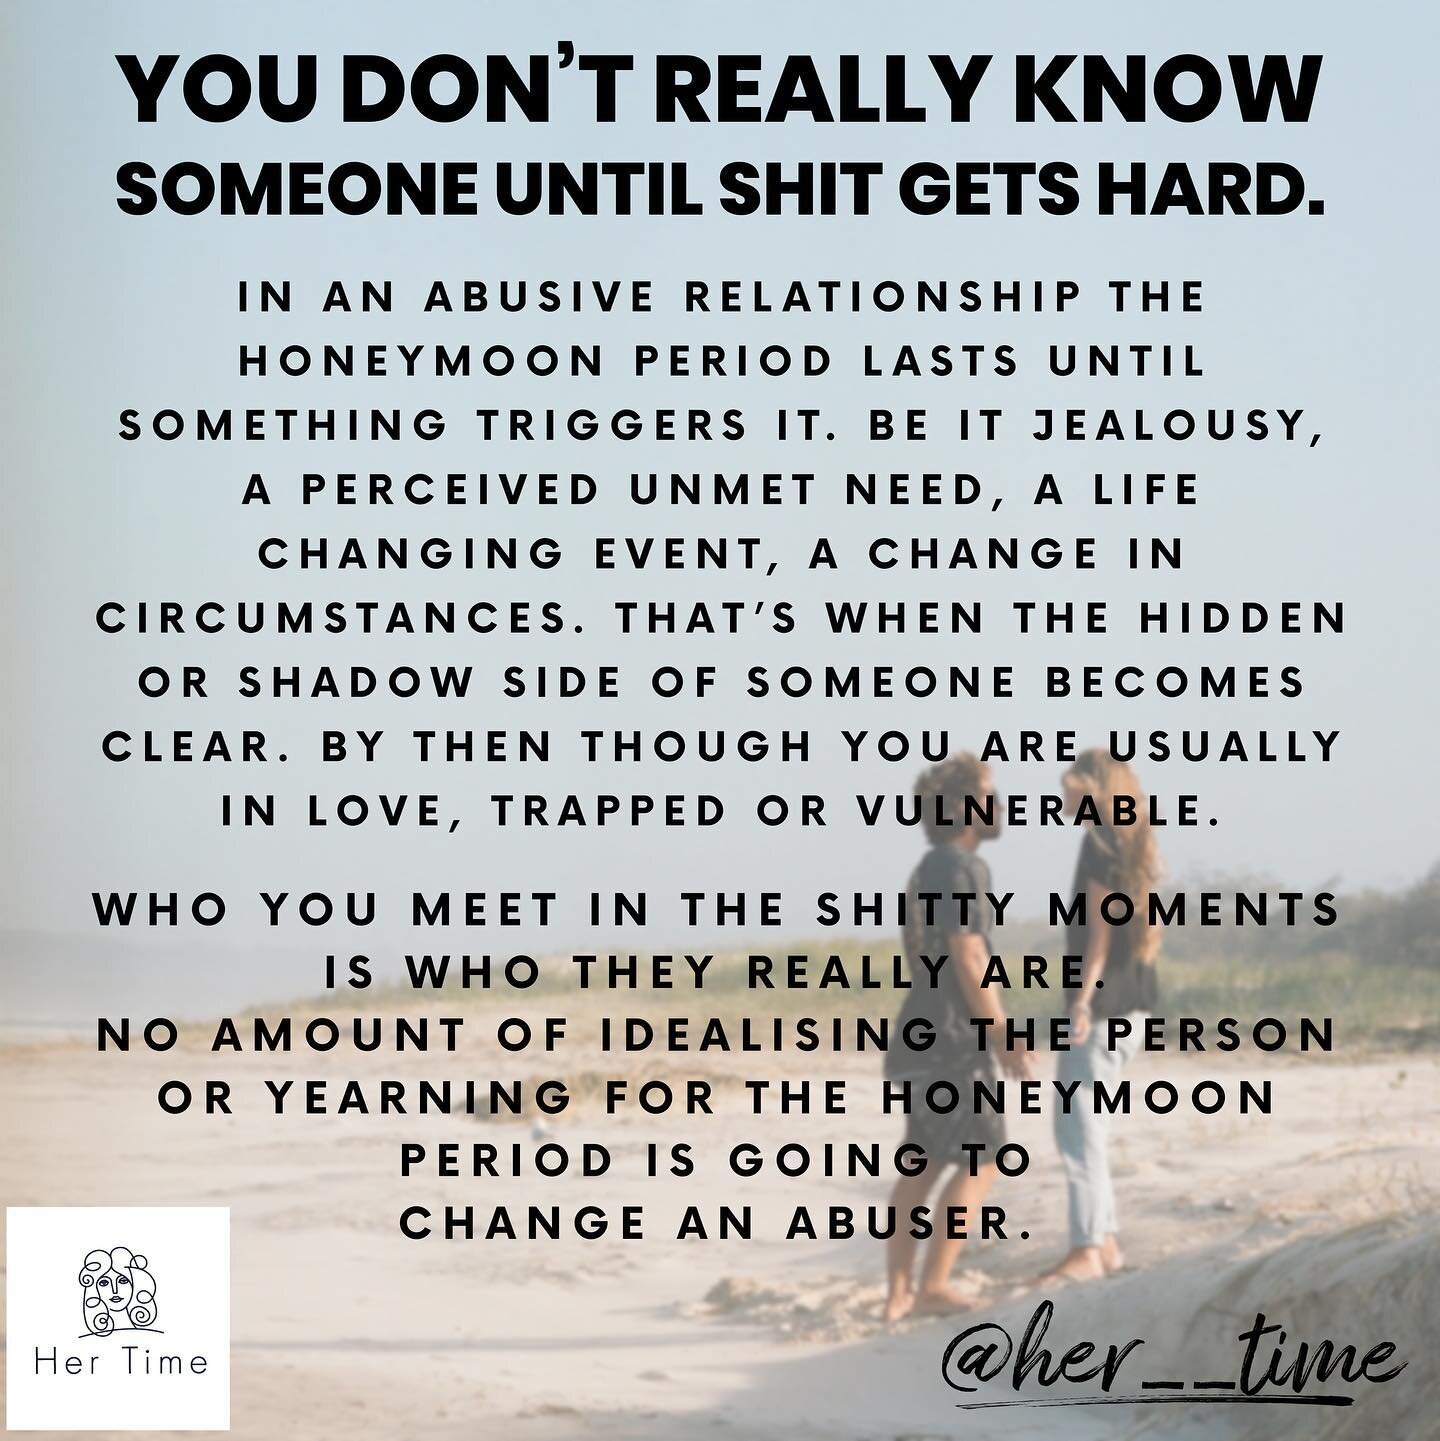 Abusive relationships are built on patterns. 

The initial period is where you fall in love. Maybe you are love bombed, have been rescued from something, made feel special or chased after. The person you meet here in this stage is a perceived dream c